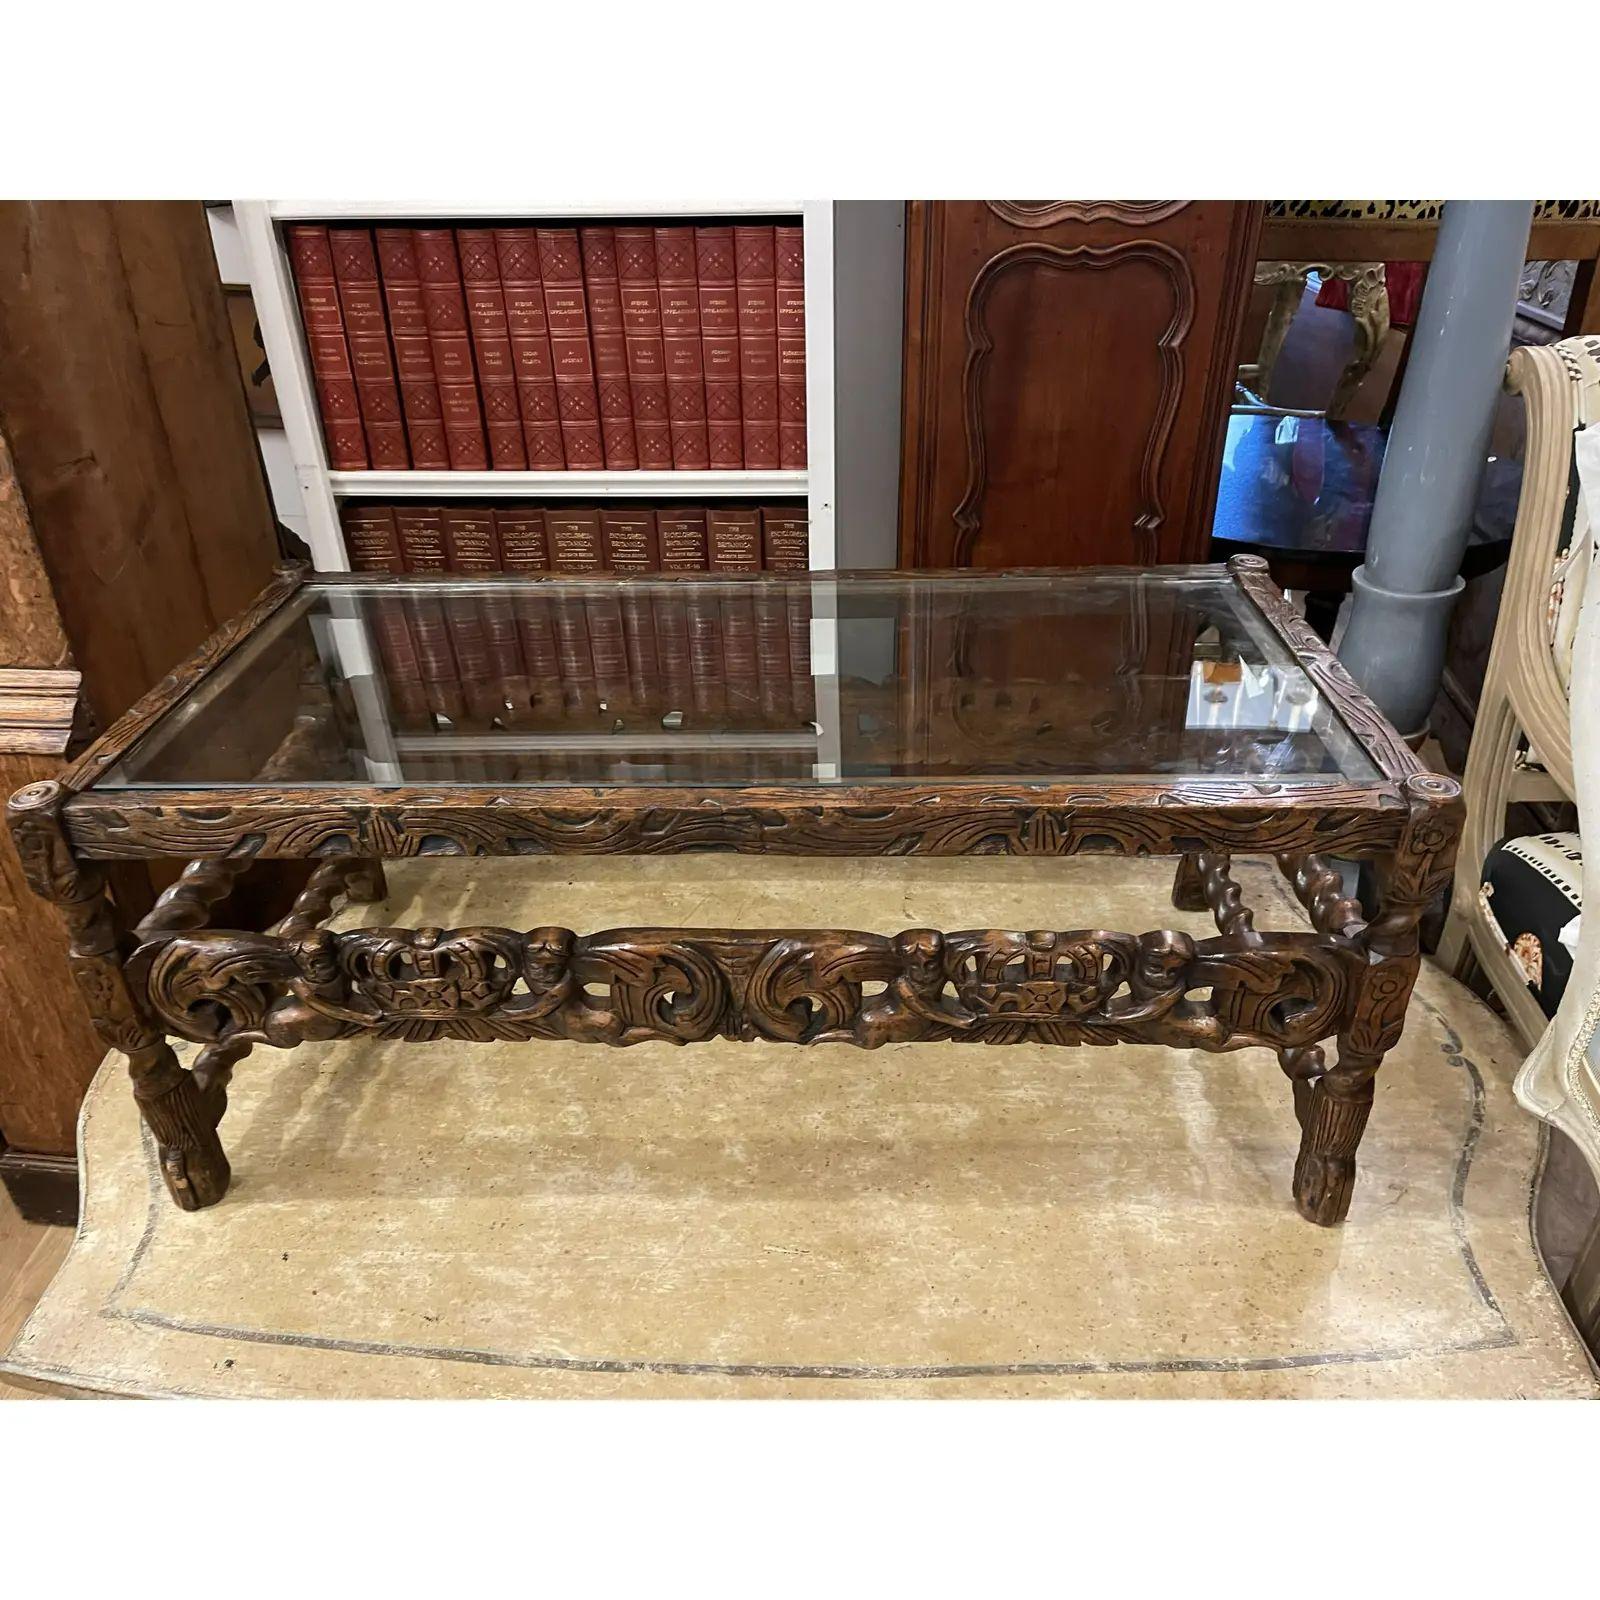 18th C Style Spanish Colonial Petite Coffee or Cocktail Table. It features putti & crown carved decoration in rustic dark walnut.

Additional information: 
Materials: Glass, Walnut
Color: Brown
Period: 2000 - 2009
Styles: Spanish Colonial
Table